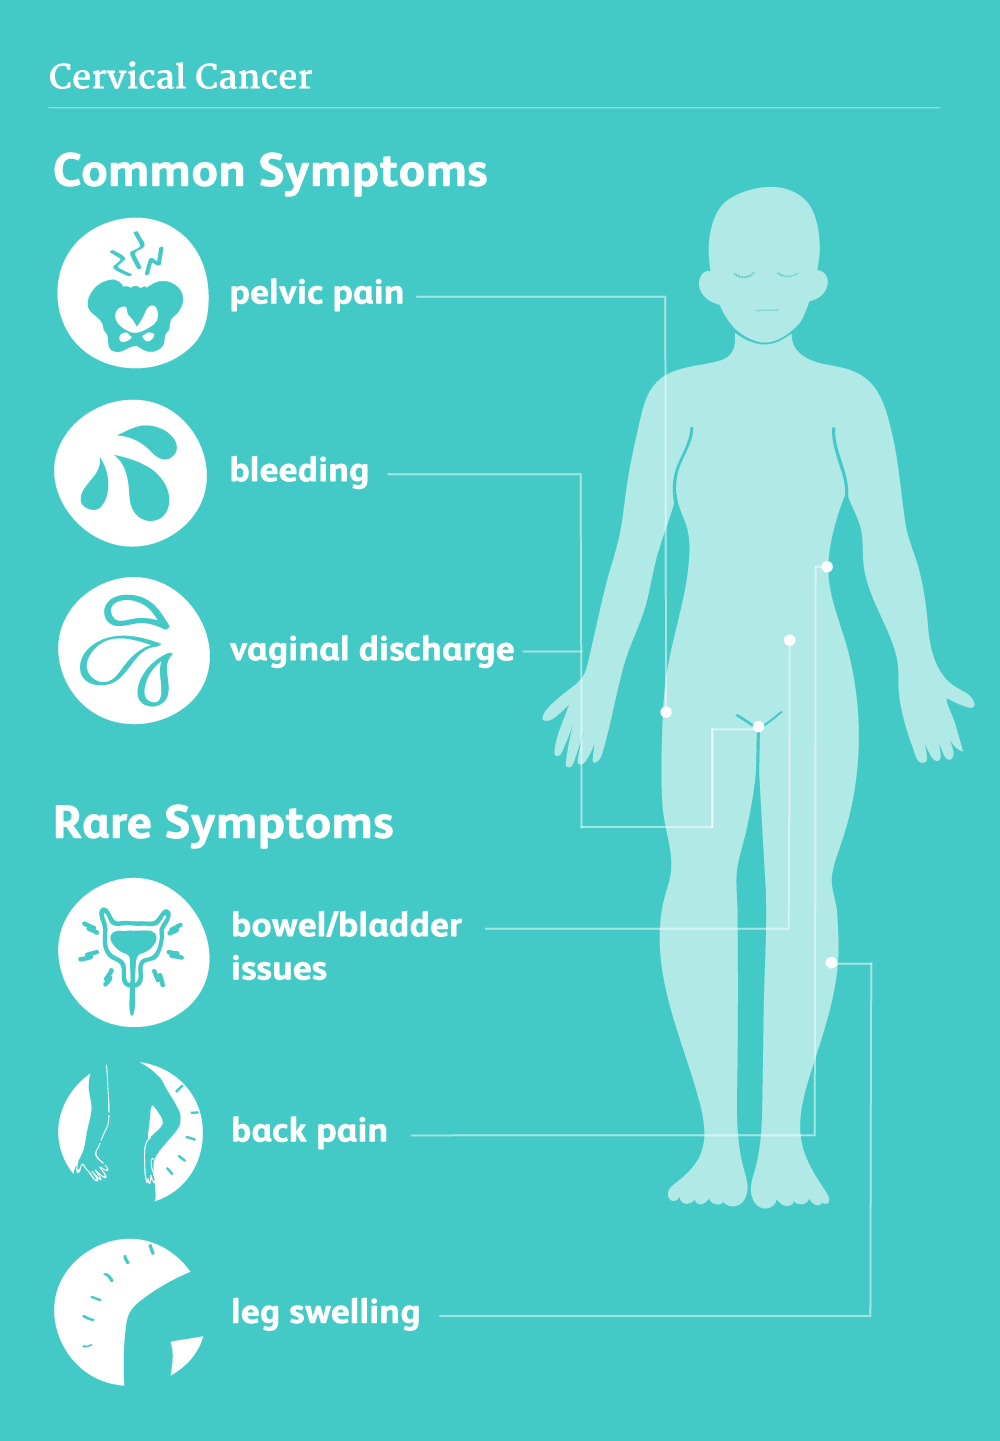 This illustration shows common symptoms of cervical cancer